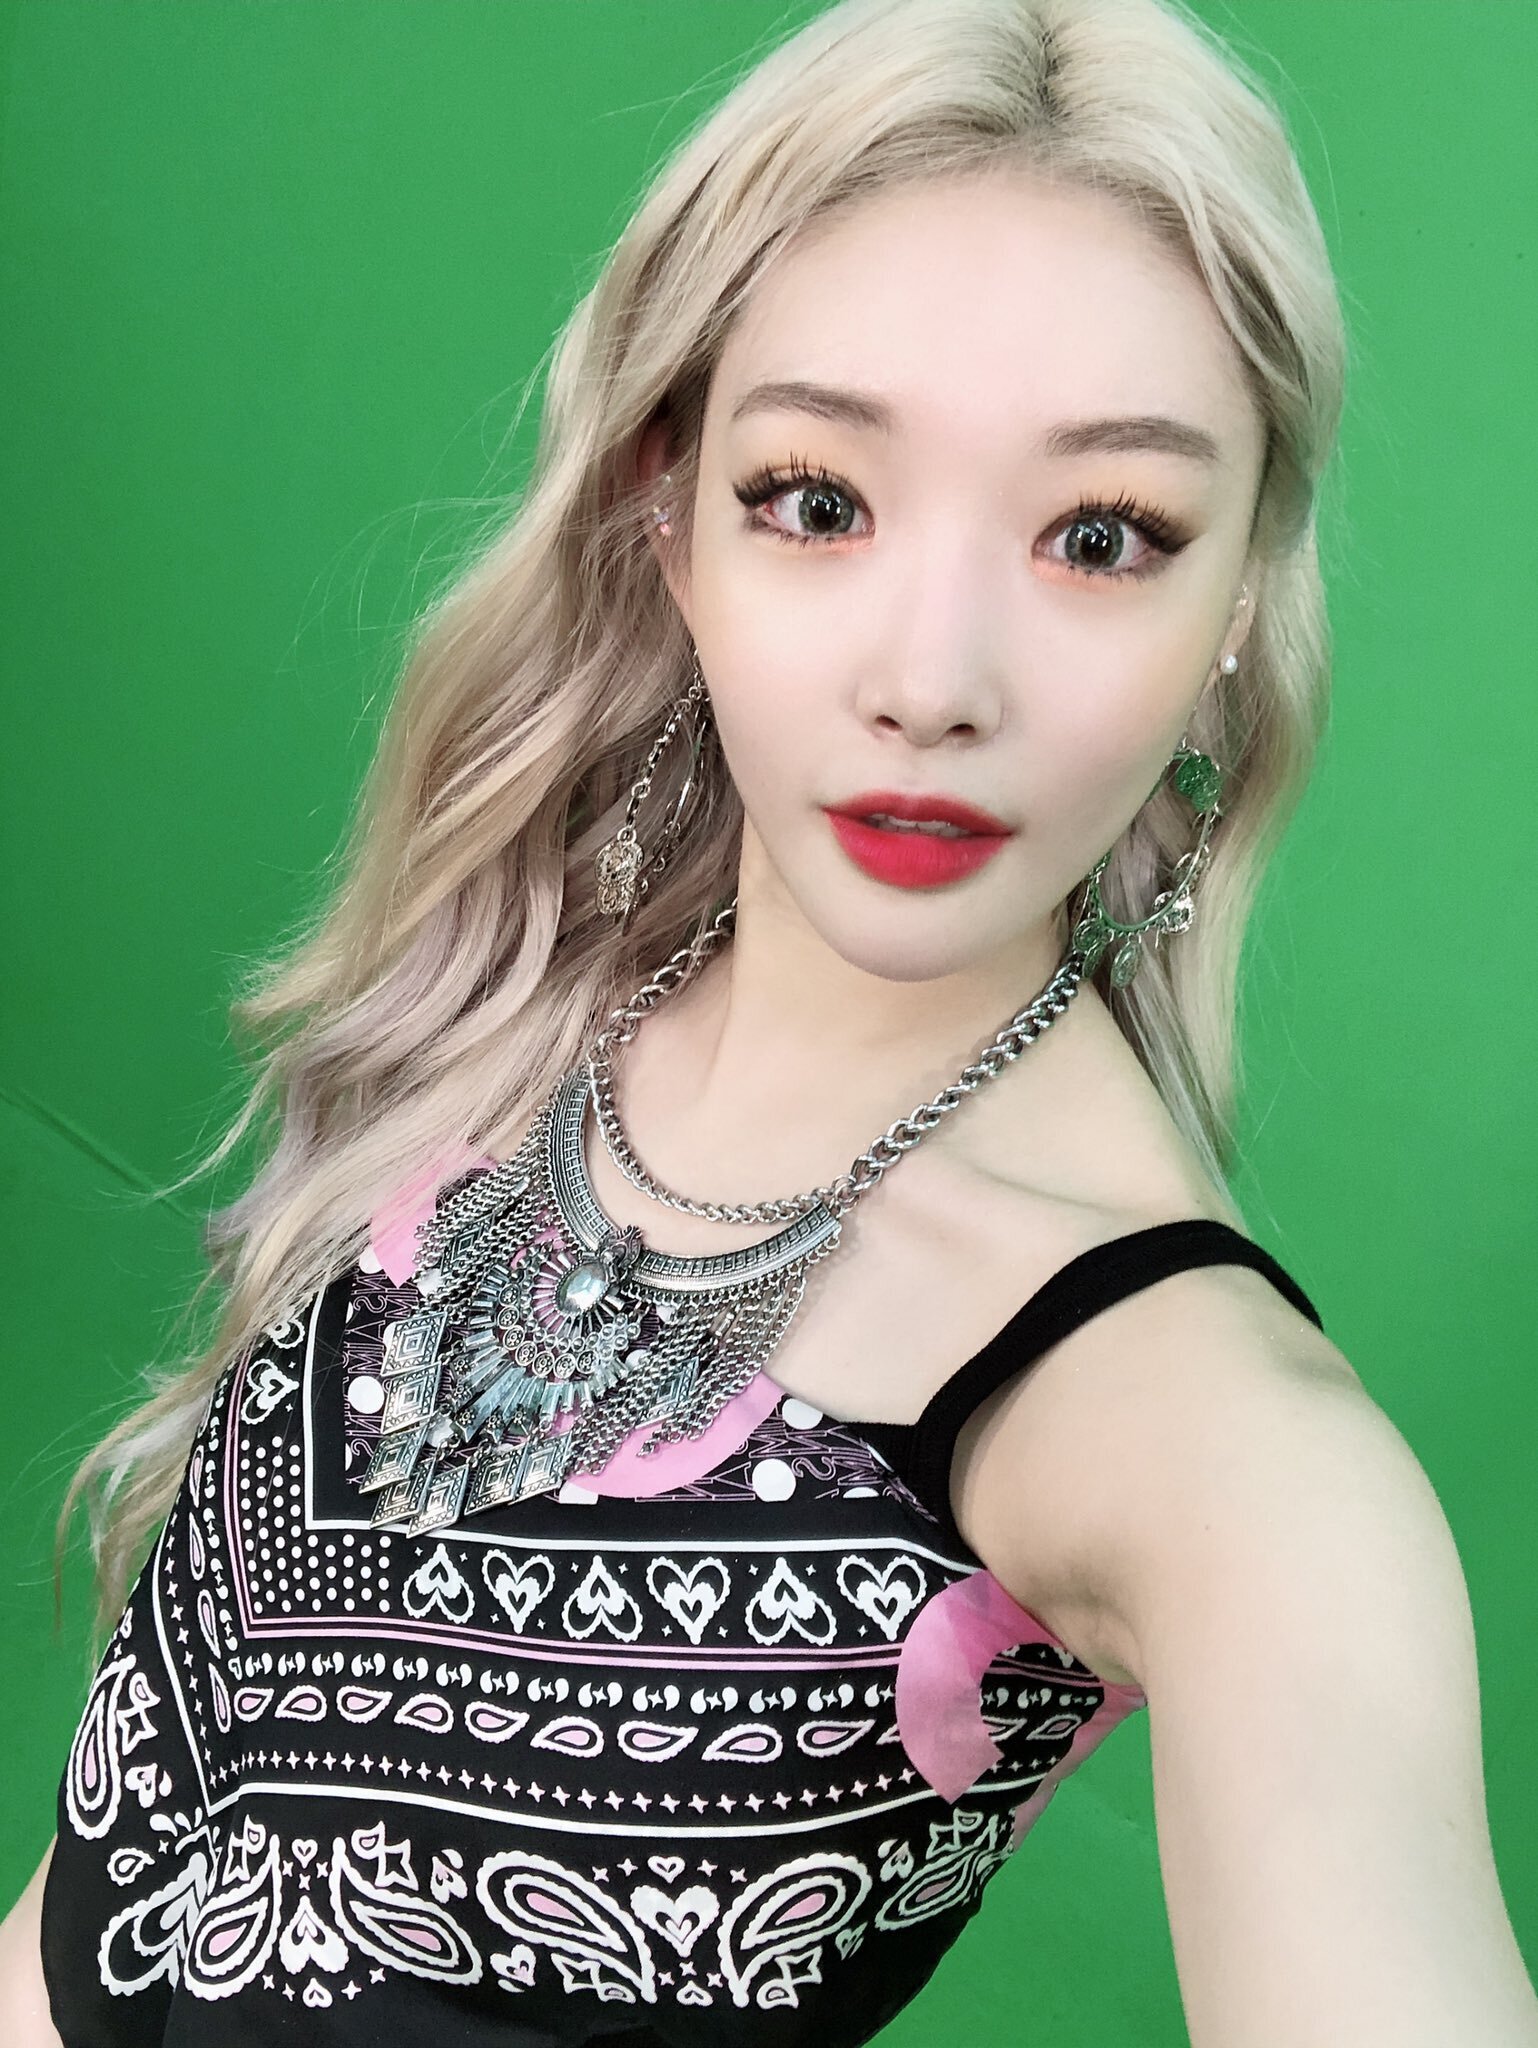 190726 INKIGAYO Twitter Update with Chungha | kpopping